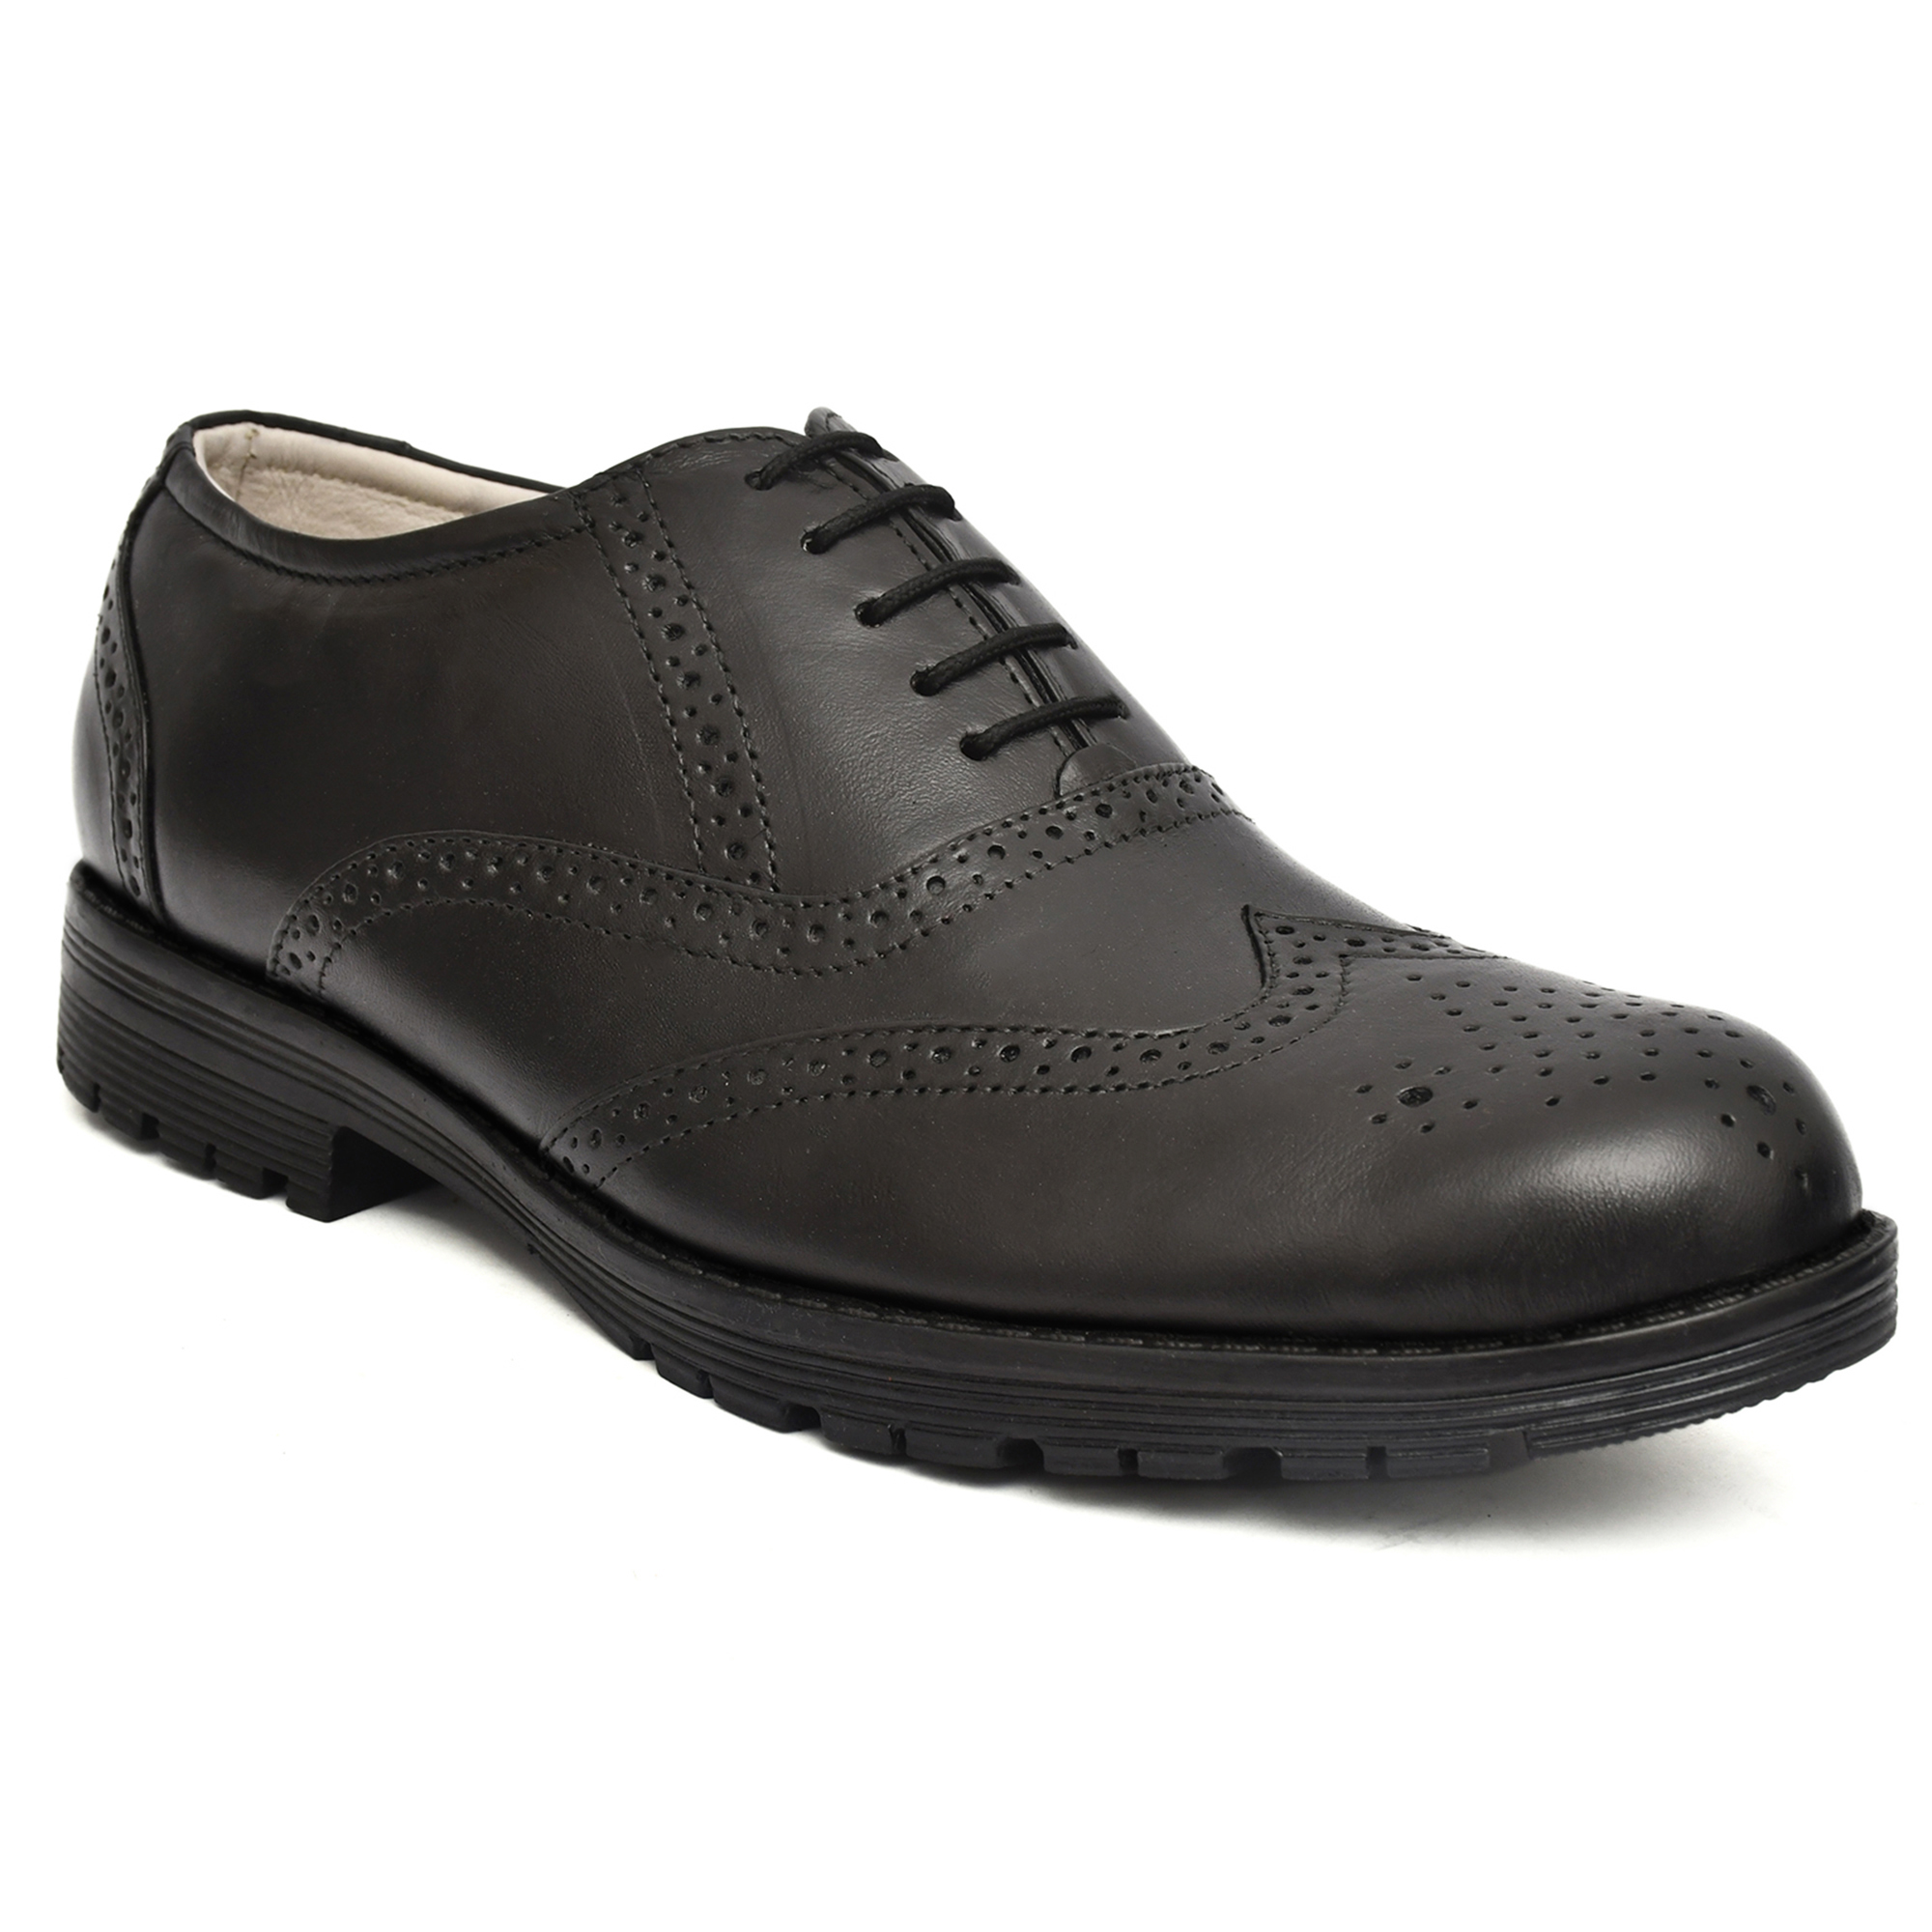 Safety Shoes : Buy Safety Formal Brogue Leather Shoes online at best prices @ factory prices in India. Article: S101-Black